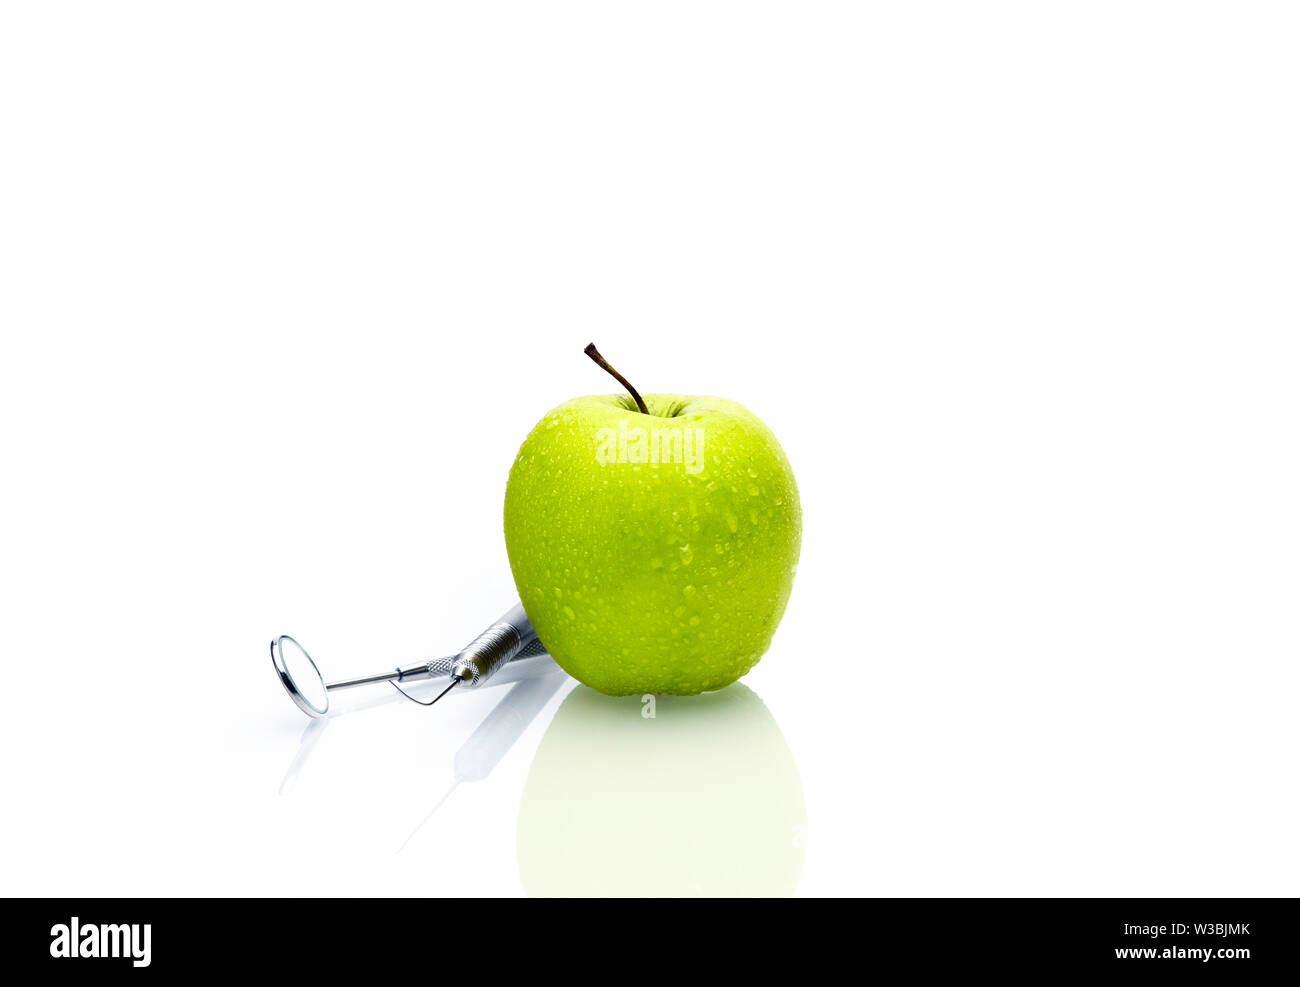 Dentist tools professional equipment and green apple on white background. Dental health concept.- Image Stock Photo